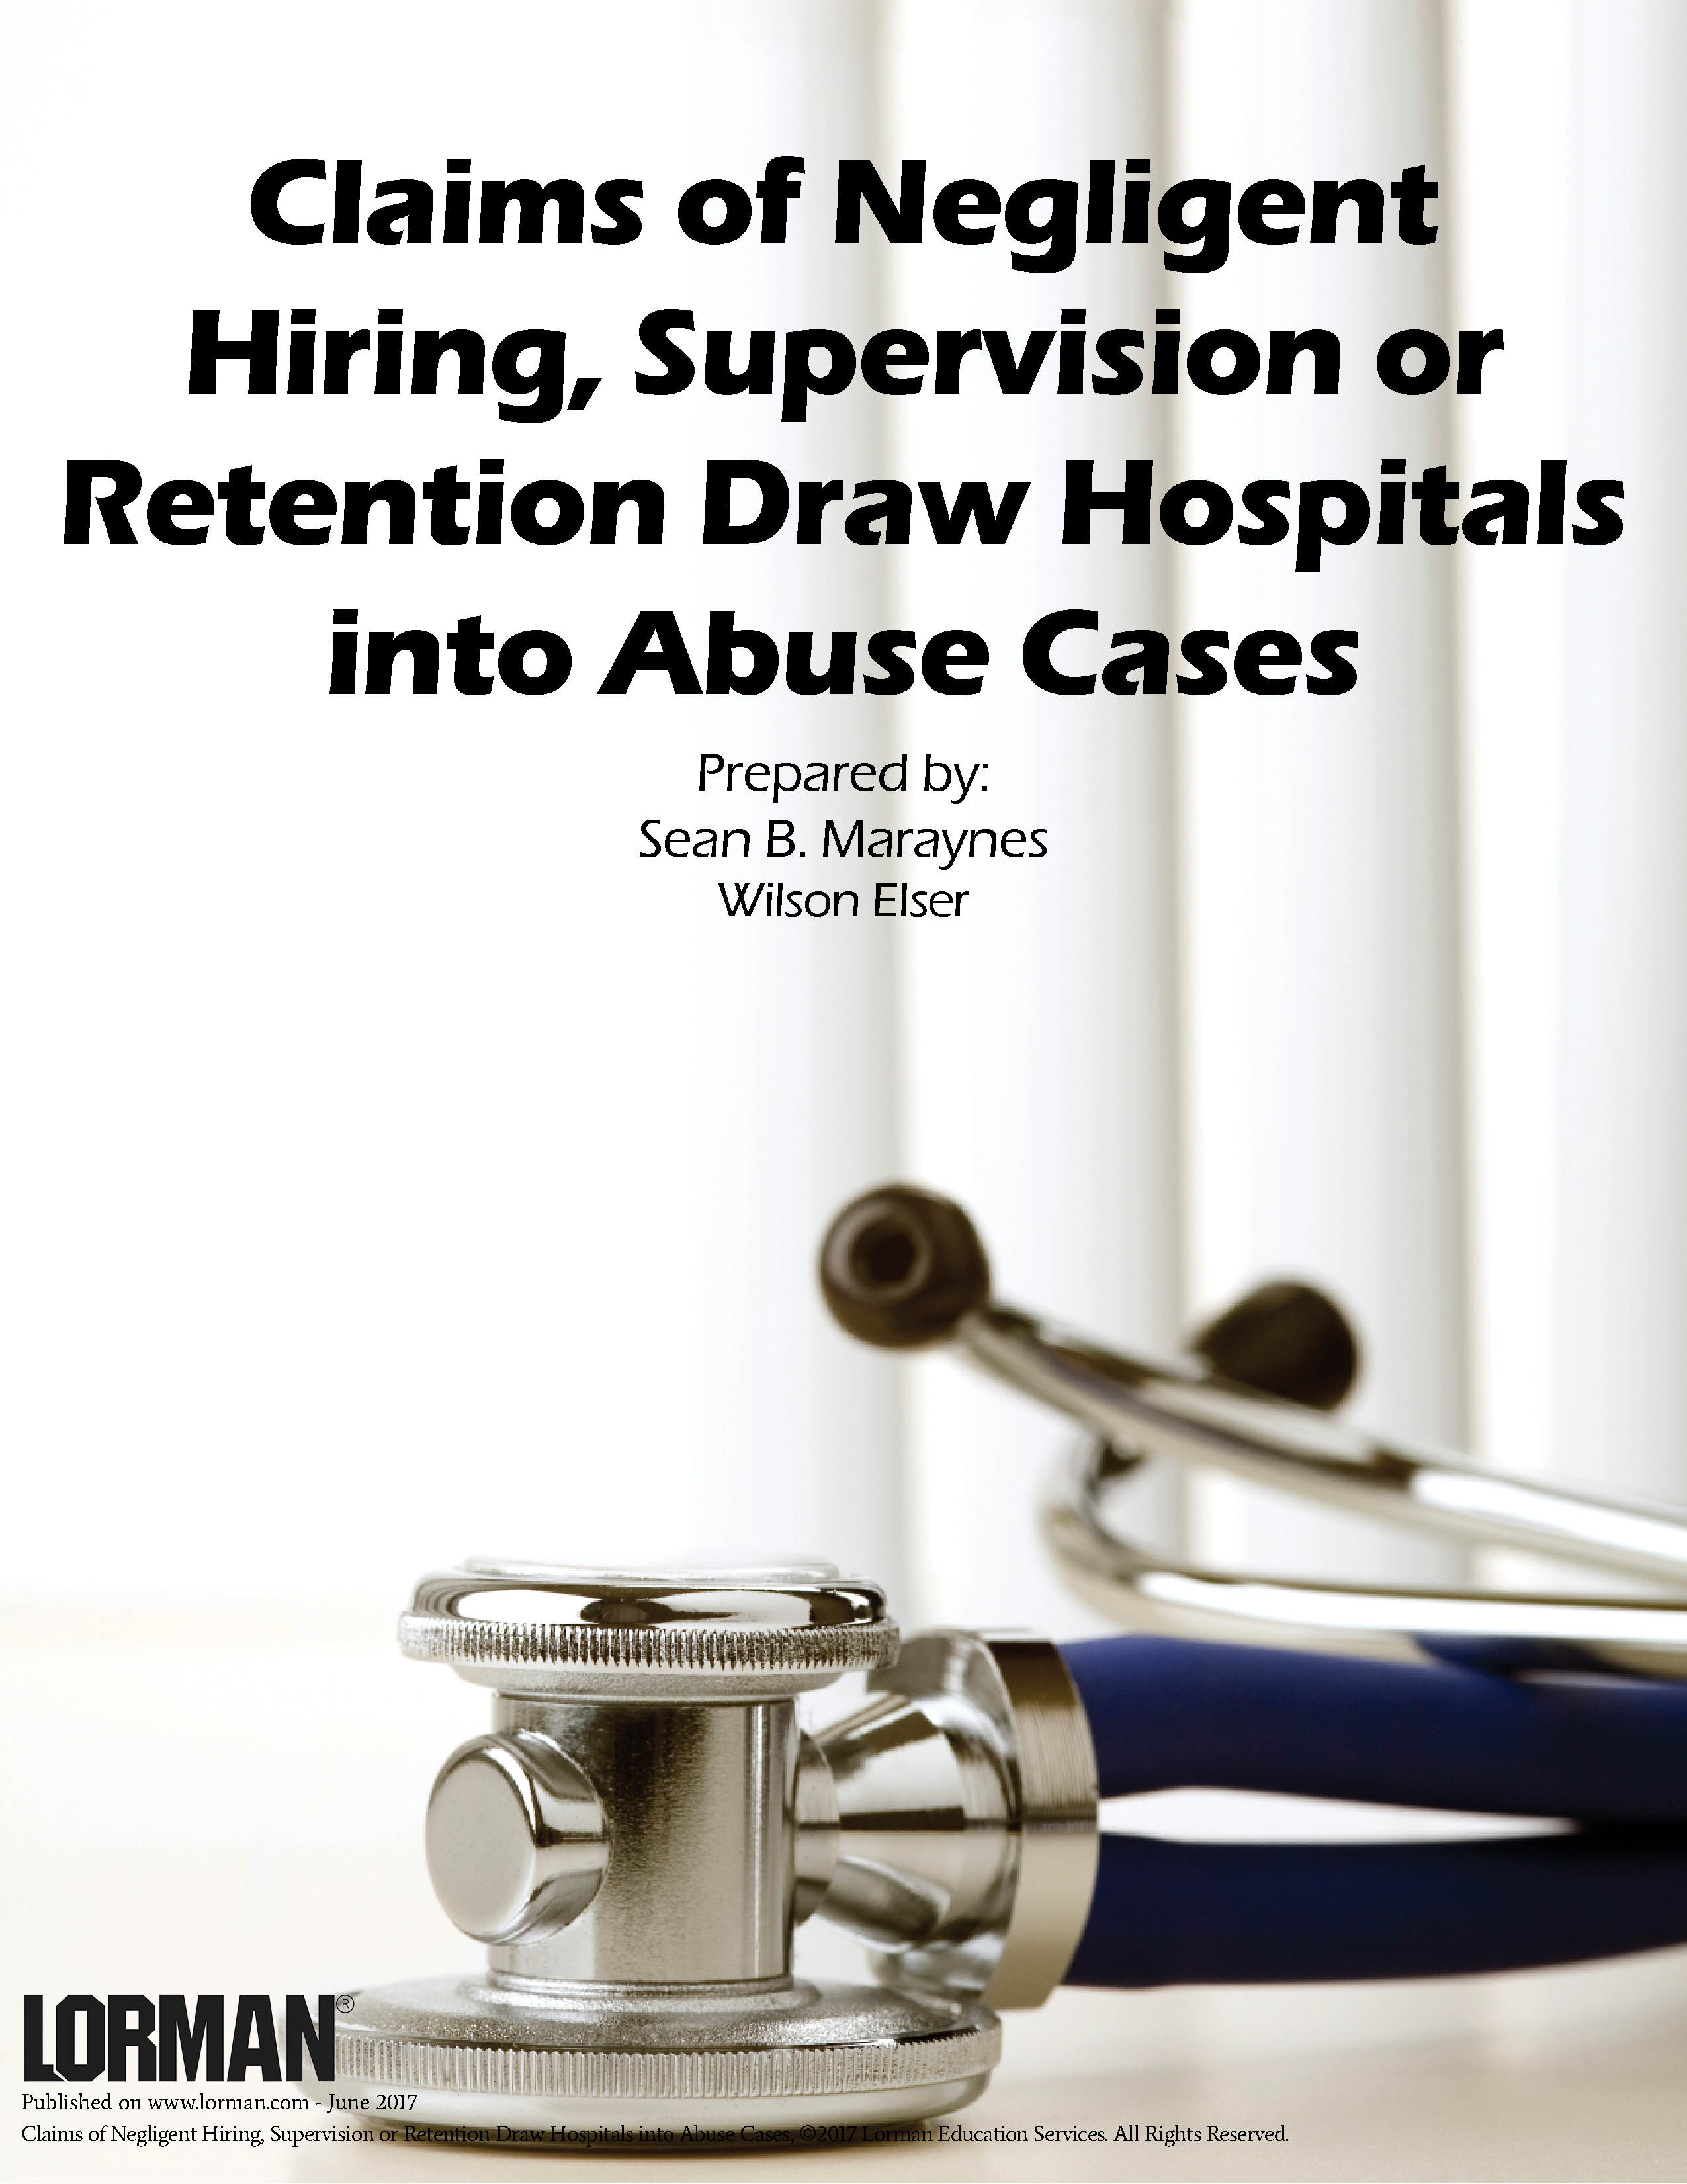 Claims of Negligent Hiring, Supervision or Retention Draw Hospitals into Abuse Cases